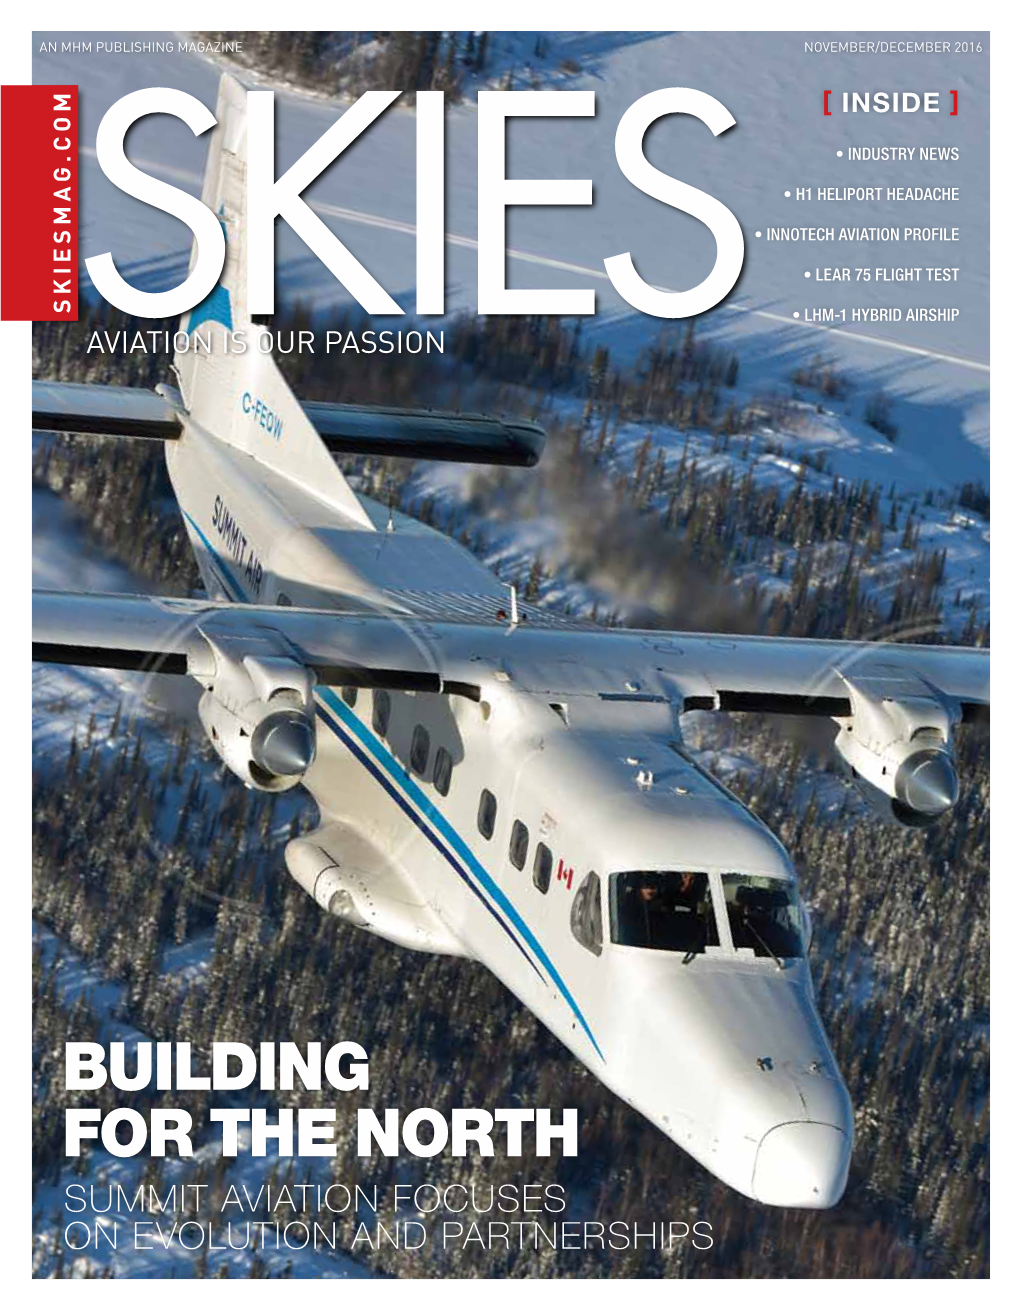 Building for the North Summit Aviation Focuses on Evolution and Partnerships WHEN DEPENDABLE MEANS EVERYTHING